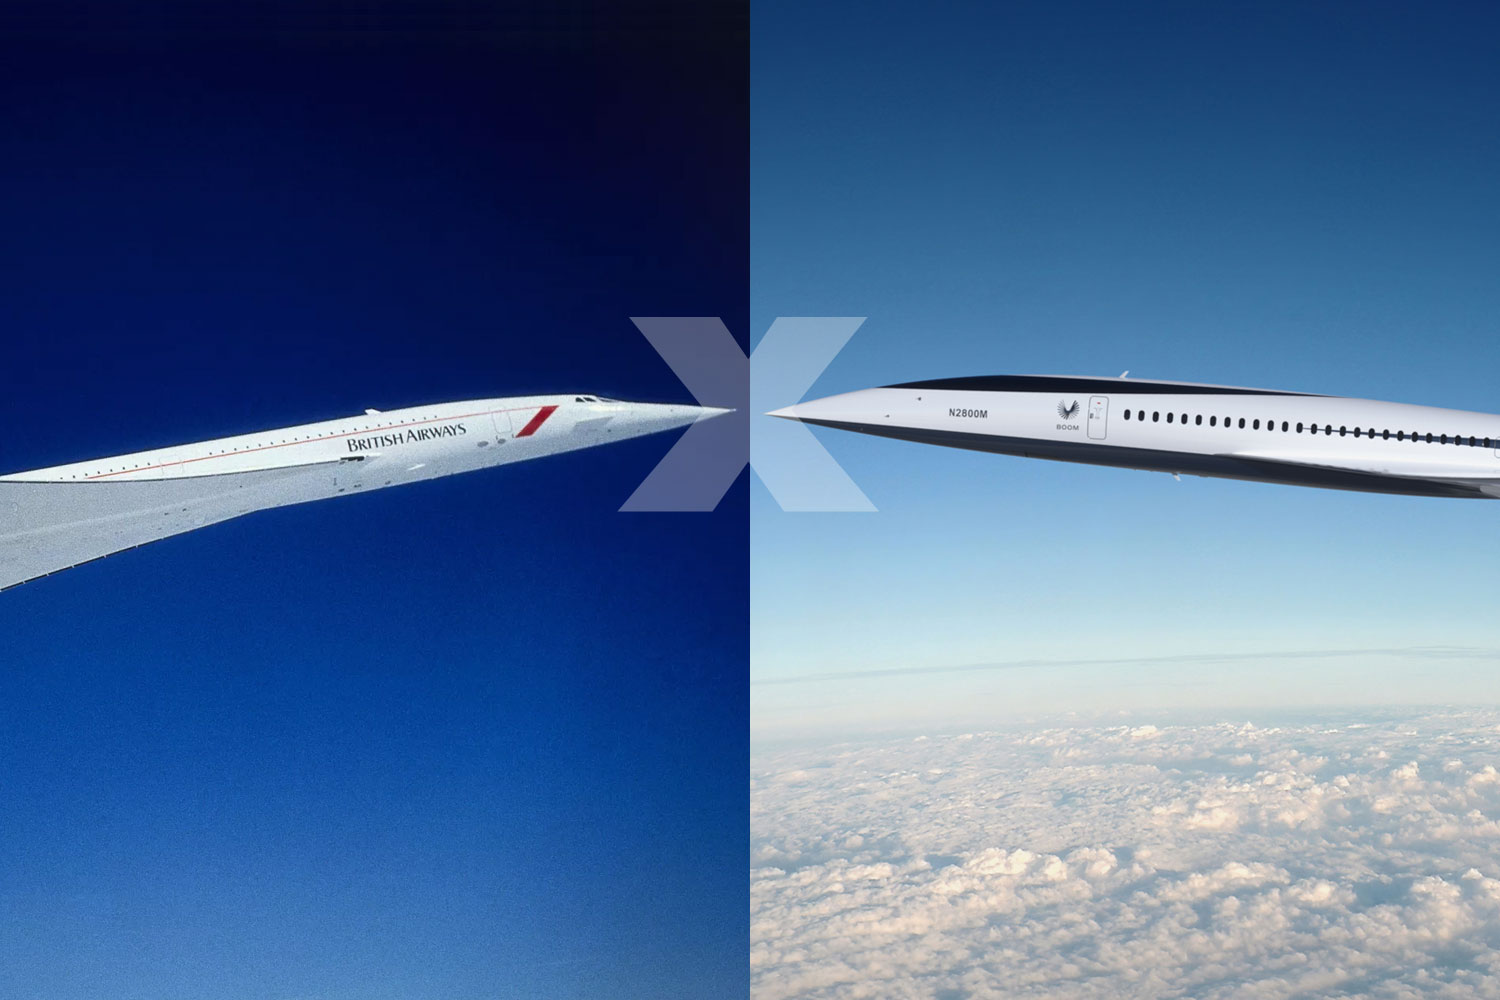 Concorde or Overture: the differences between supersonic passenger